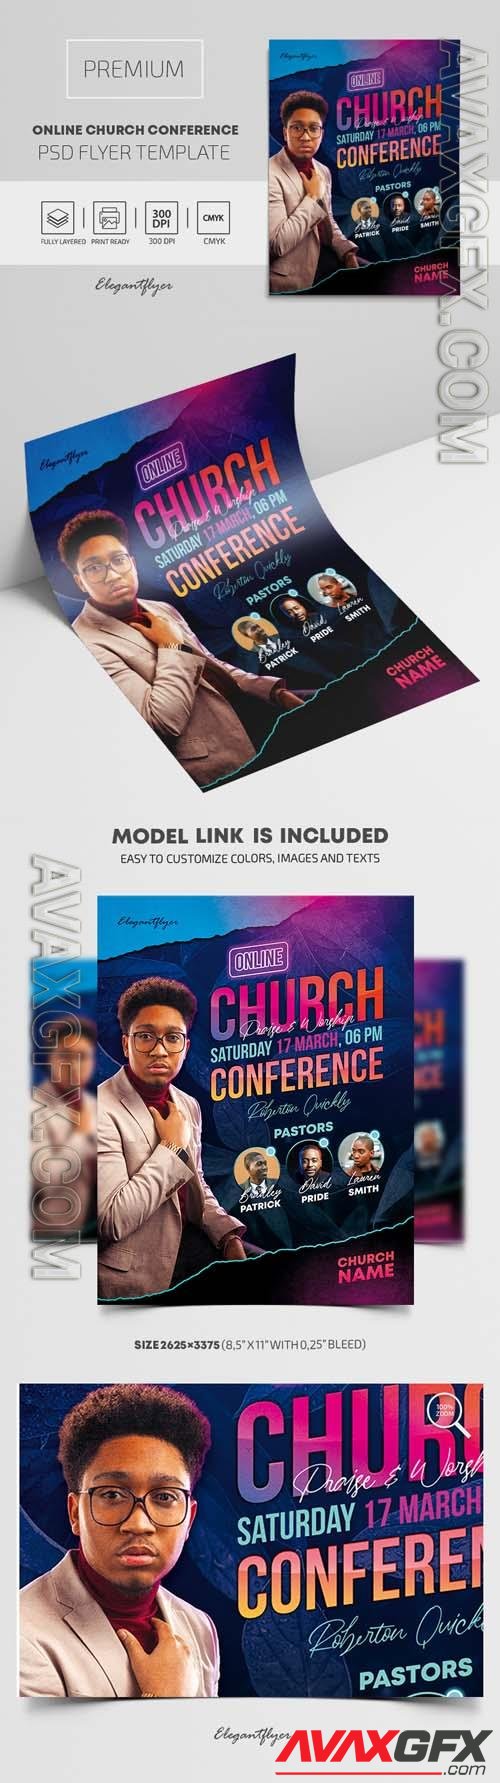 Online Church Conference Premium PSD Flyer Template